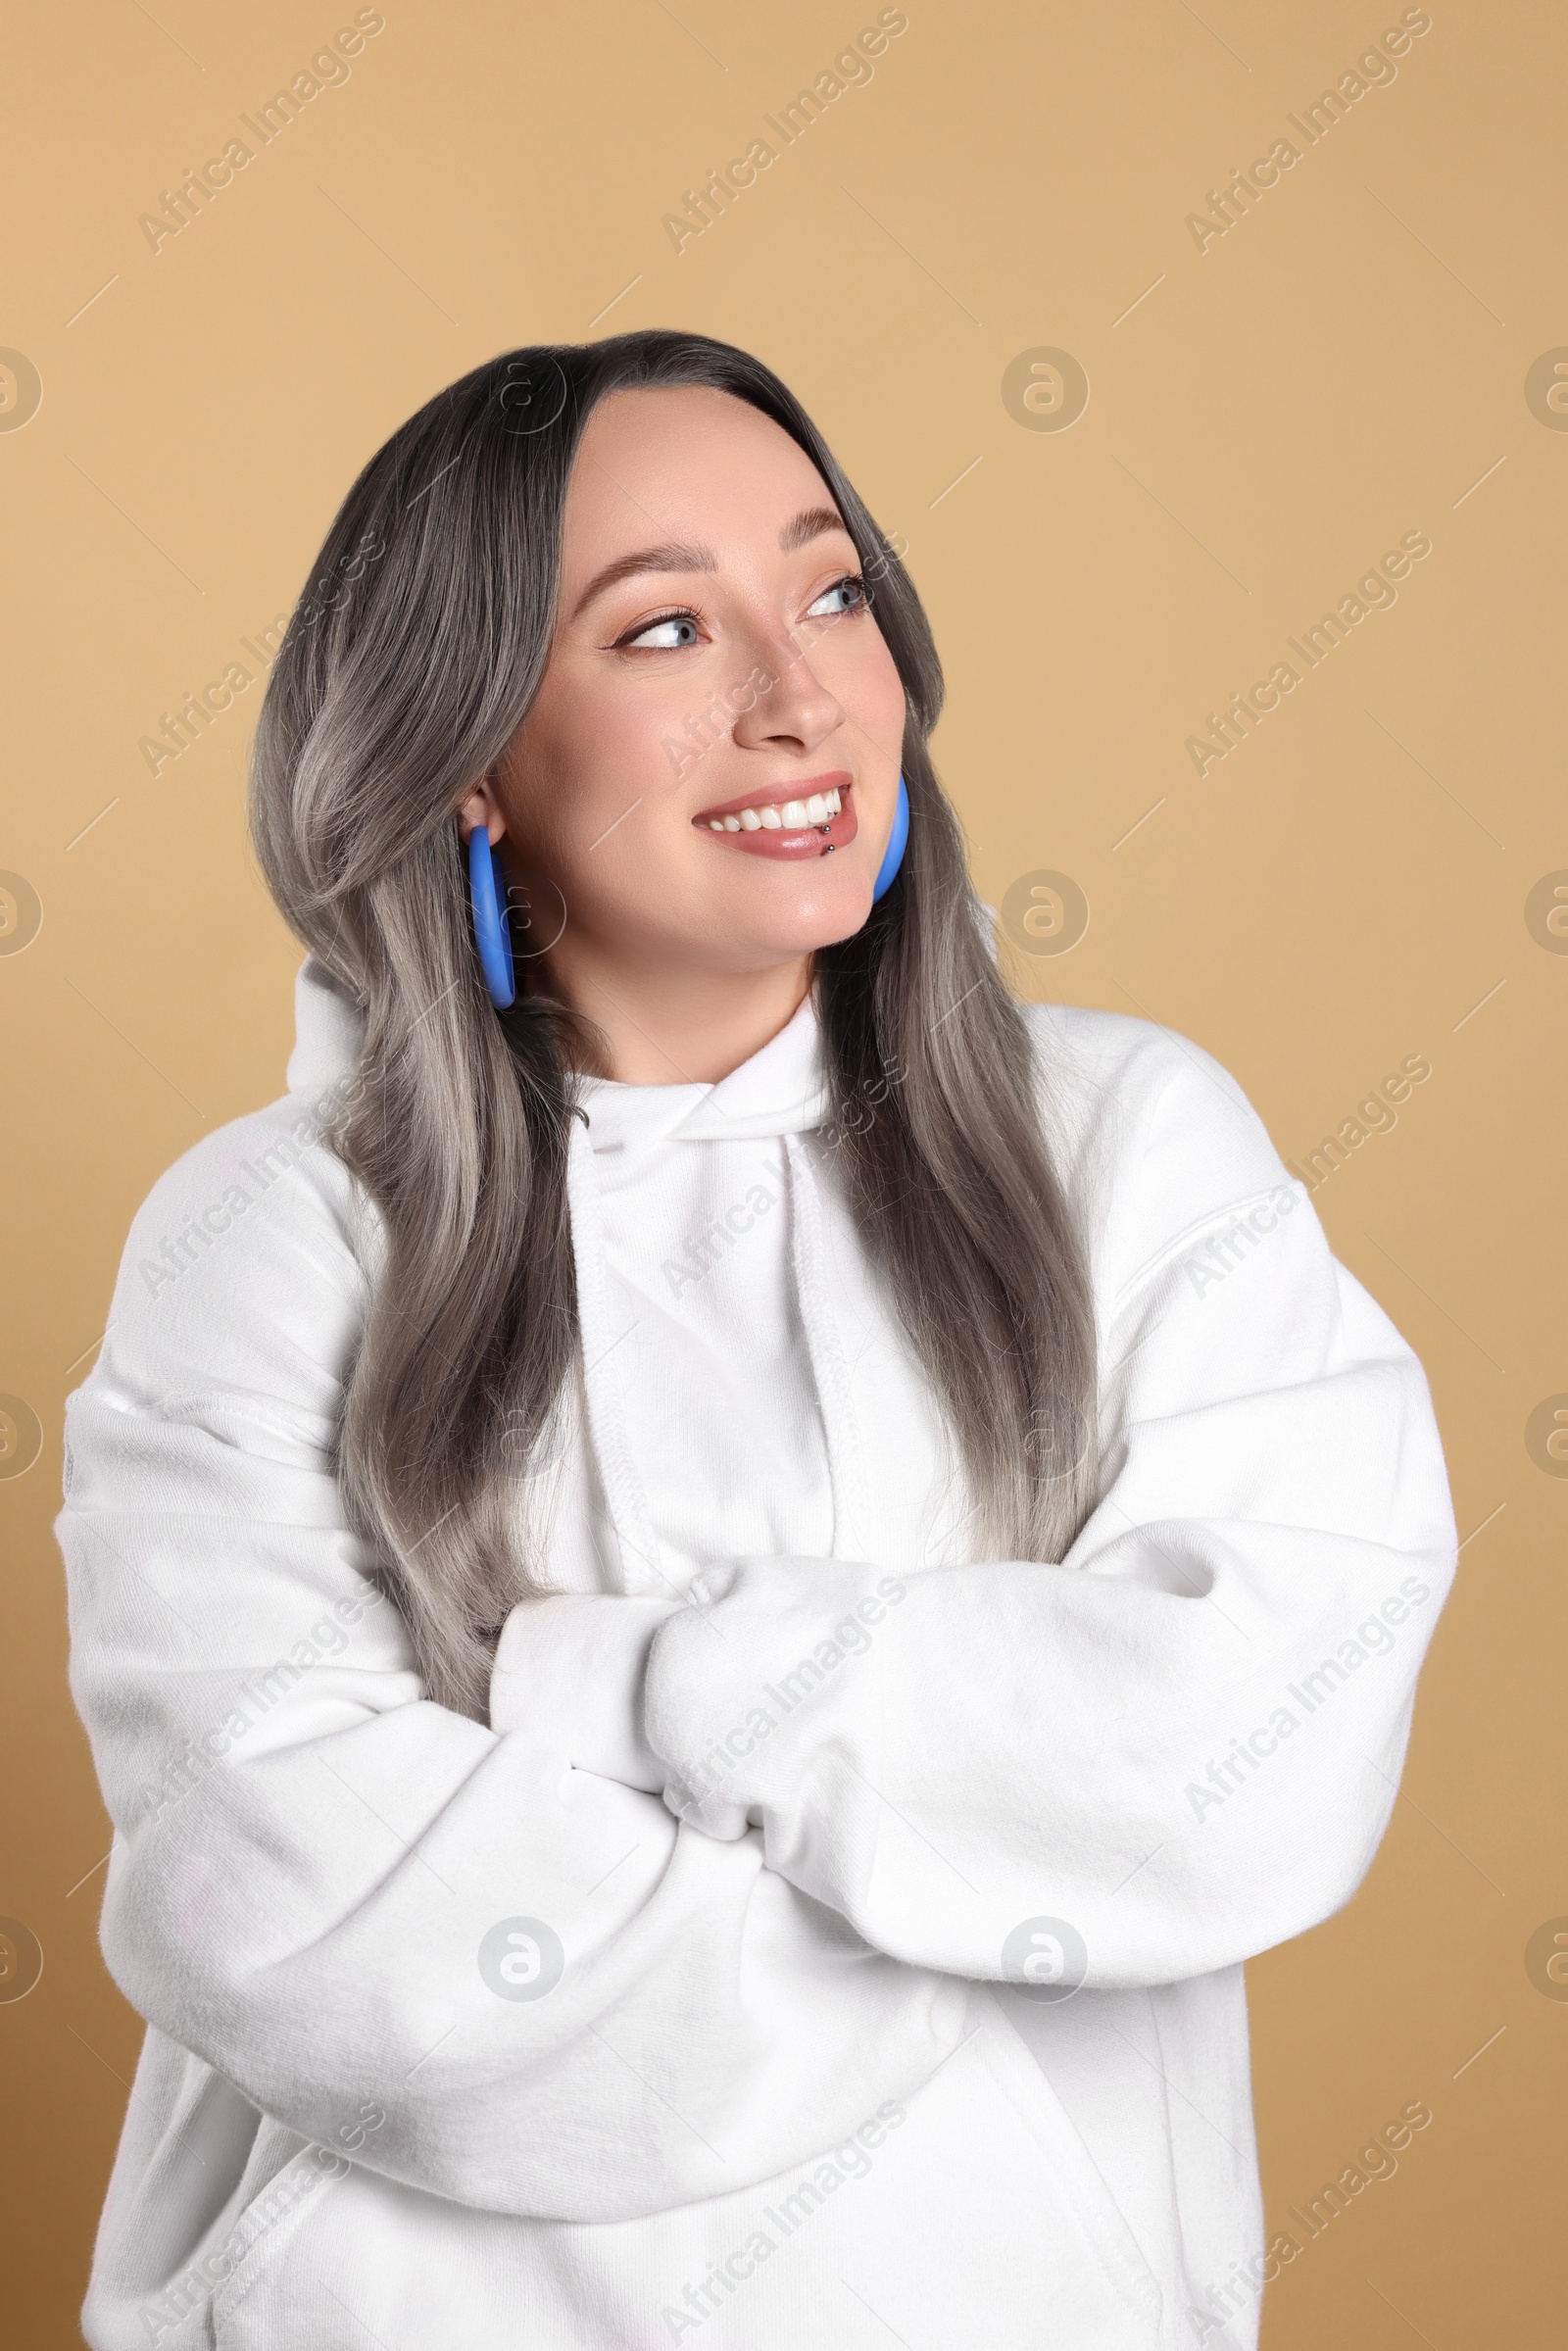 Image of Smiling woman with ash hair color on beige background